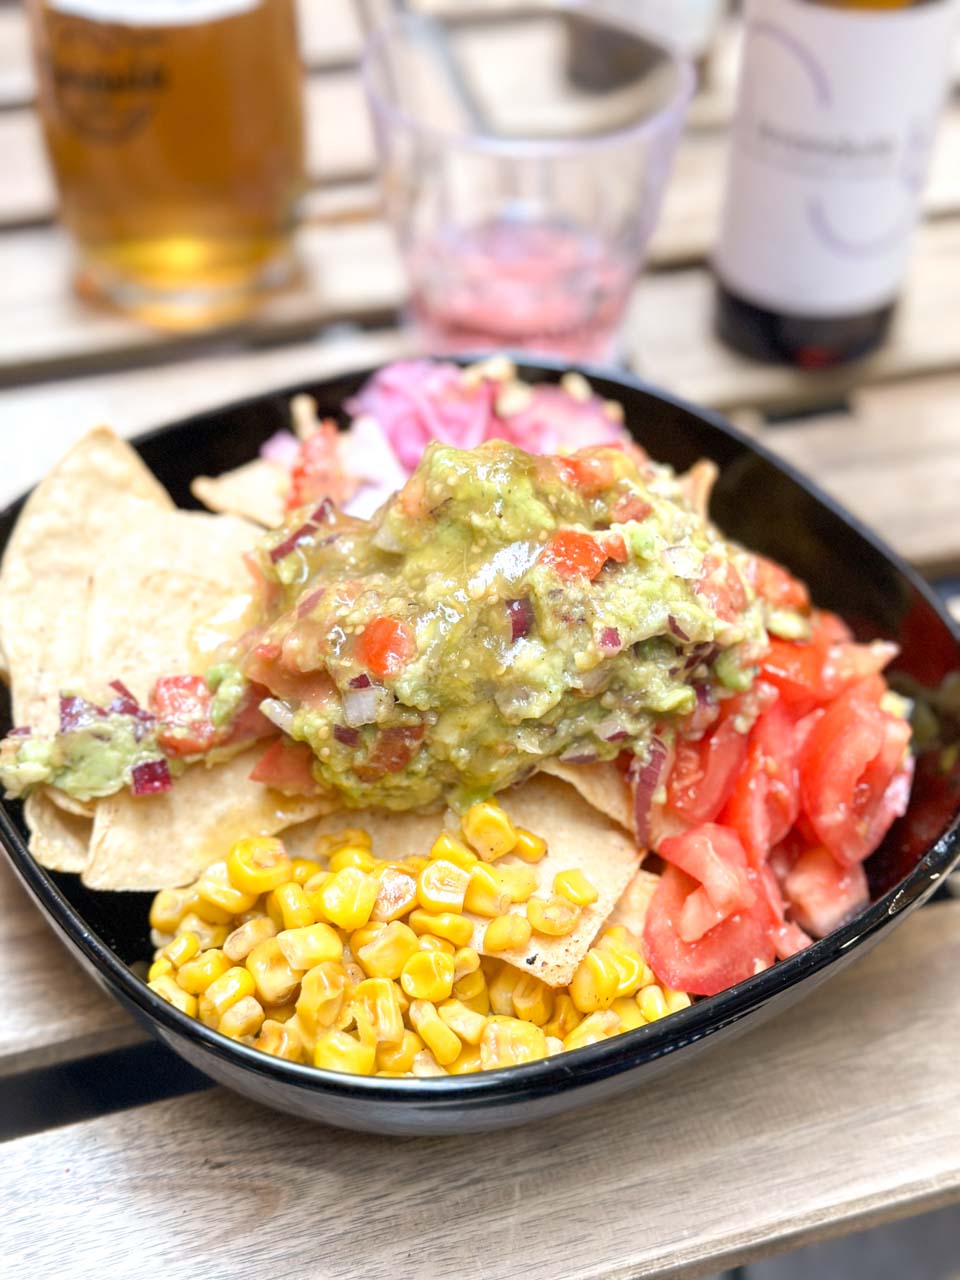 Appetising nachos platter, topped with guacamole, fresh tomatoes, and sweetcorn, served in a black bowl